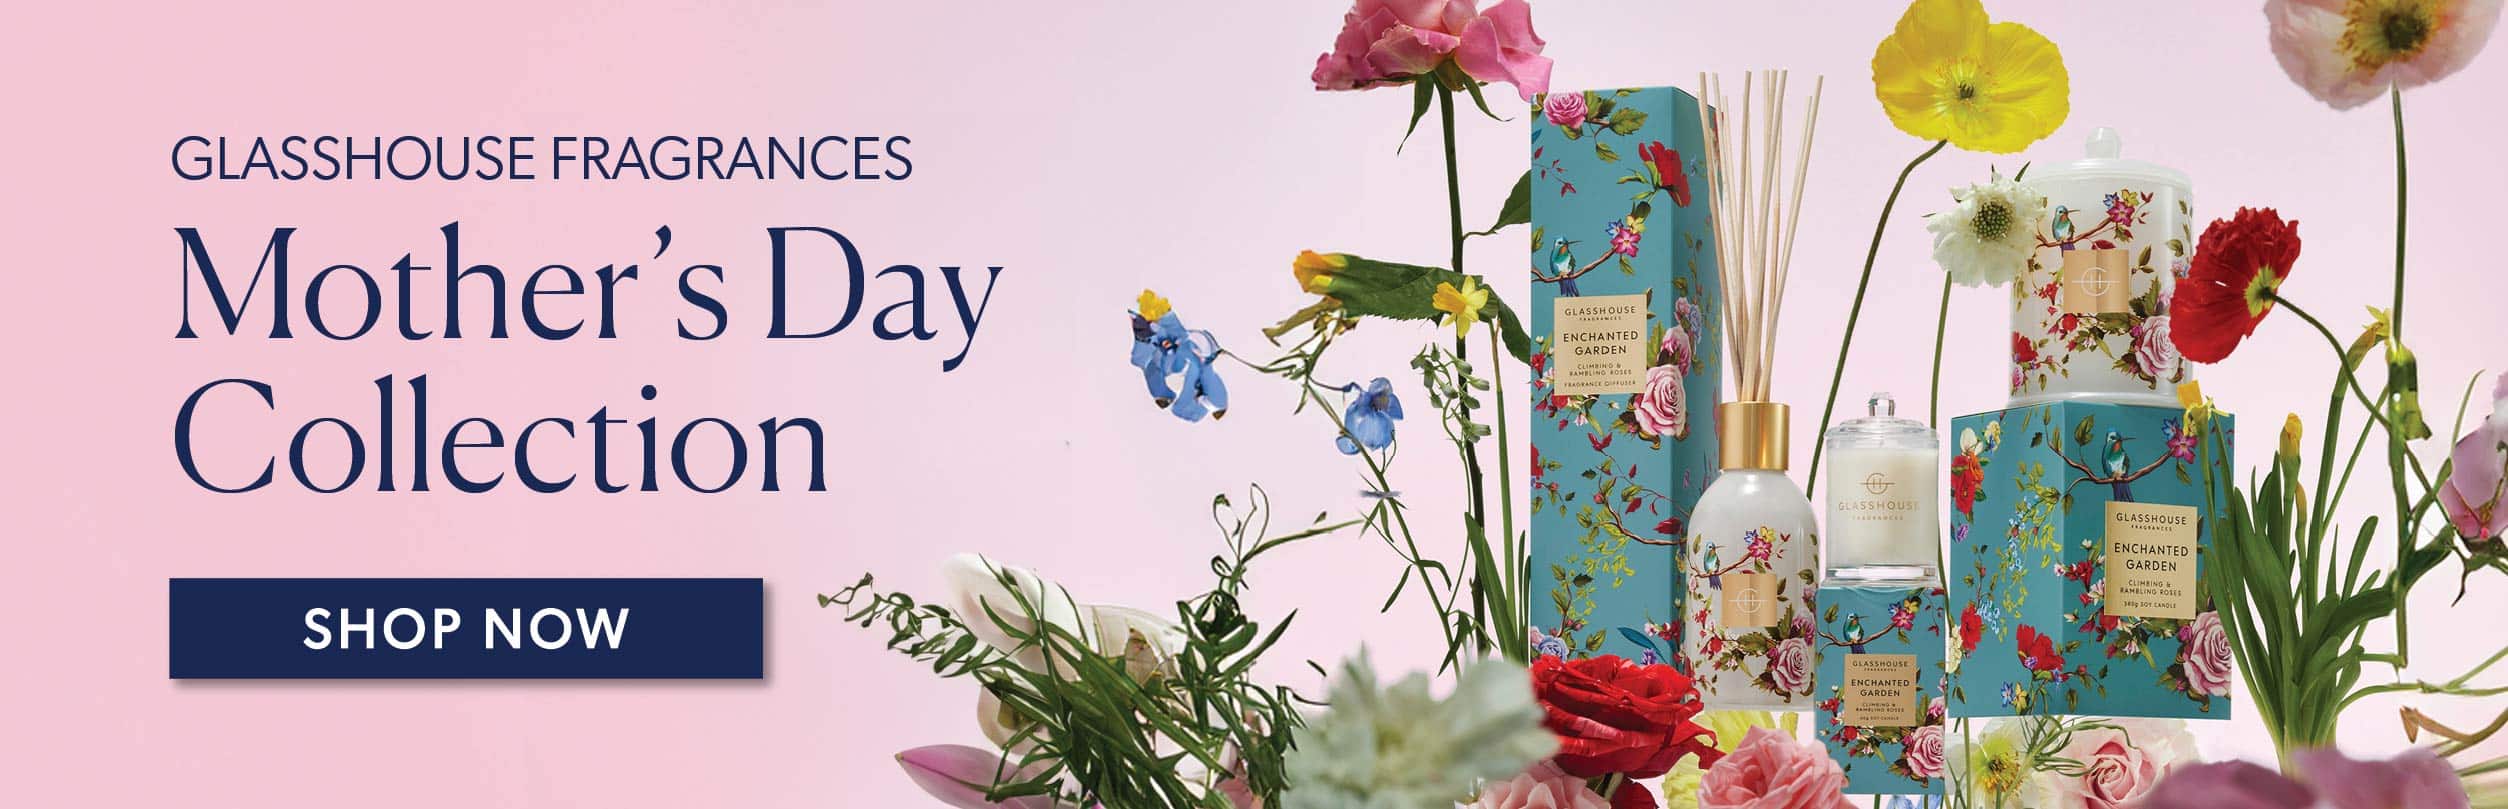 Glasshouse Fragrances Mother's Day Collection